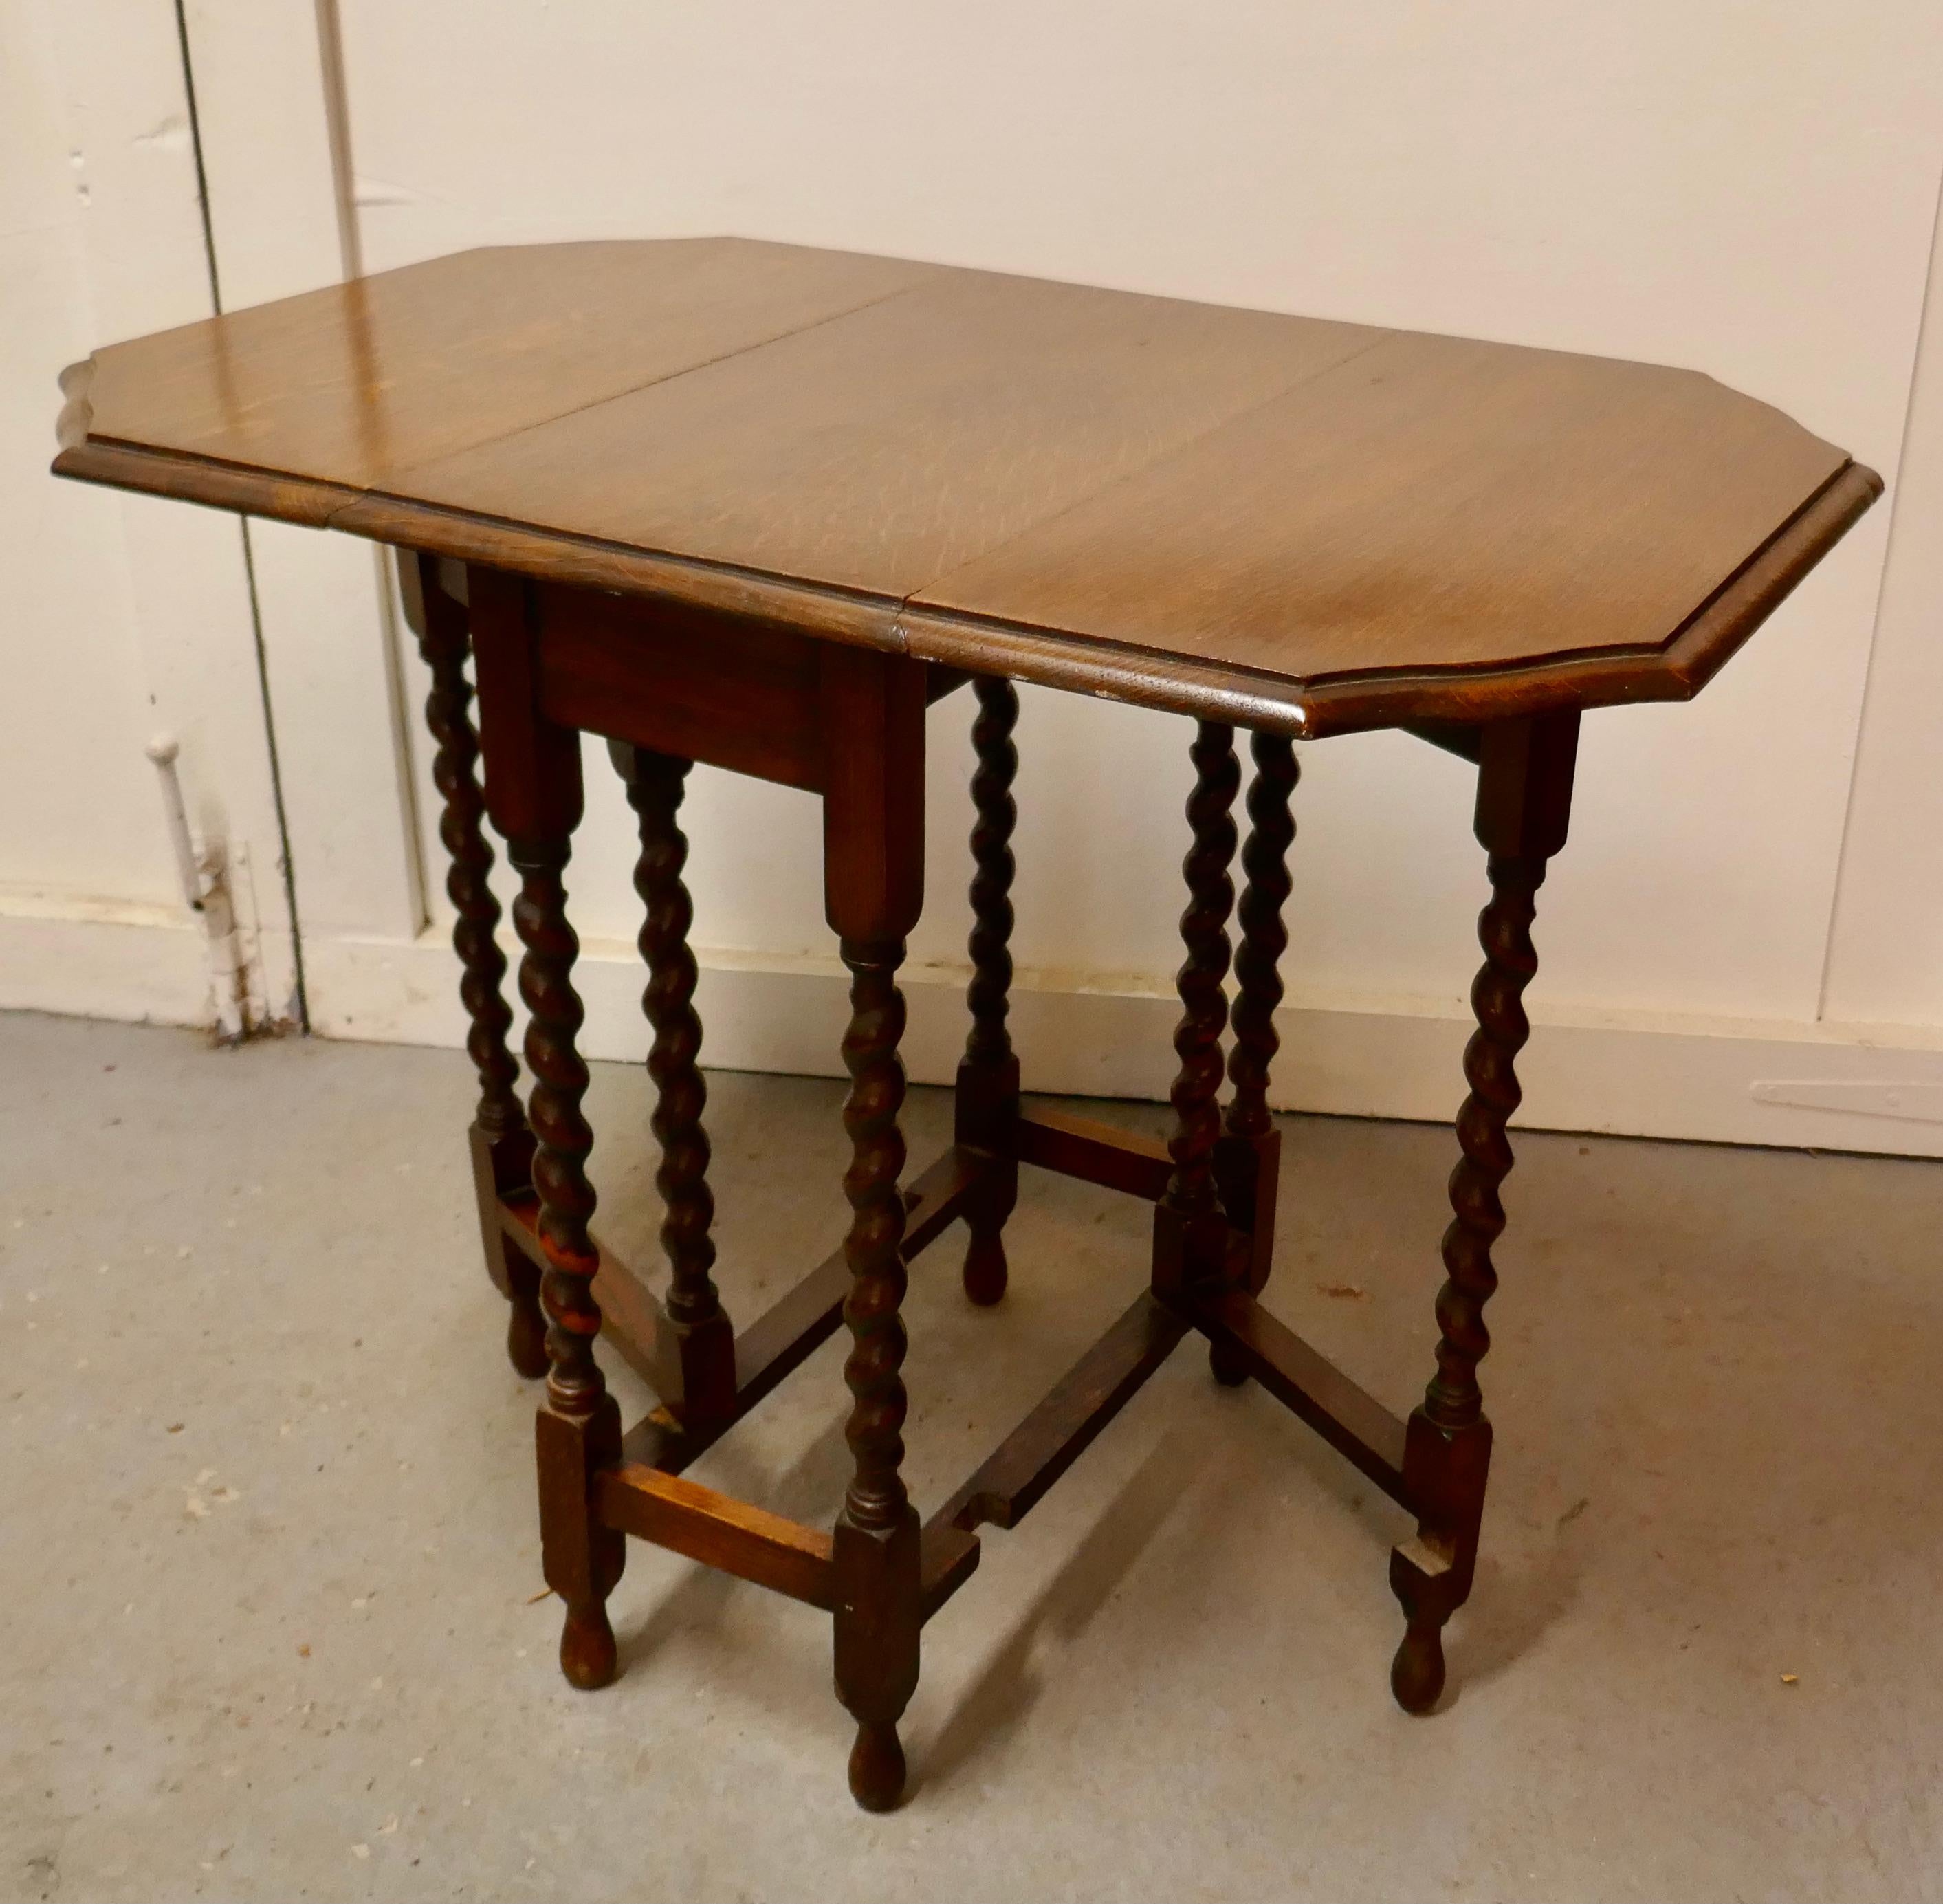 19th Century This is a Good Solid Oak Victorian Gate Leg Table